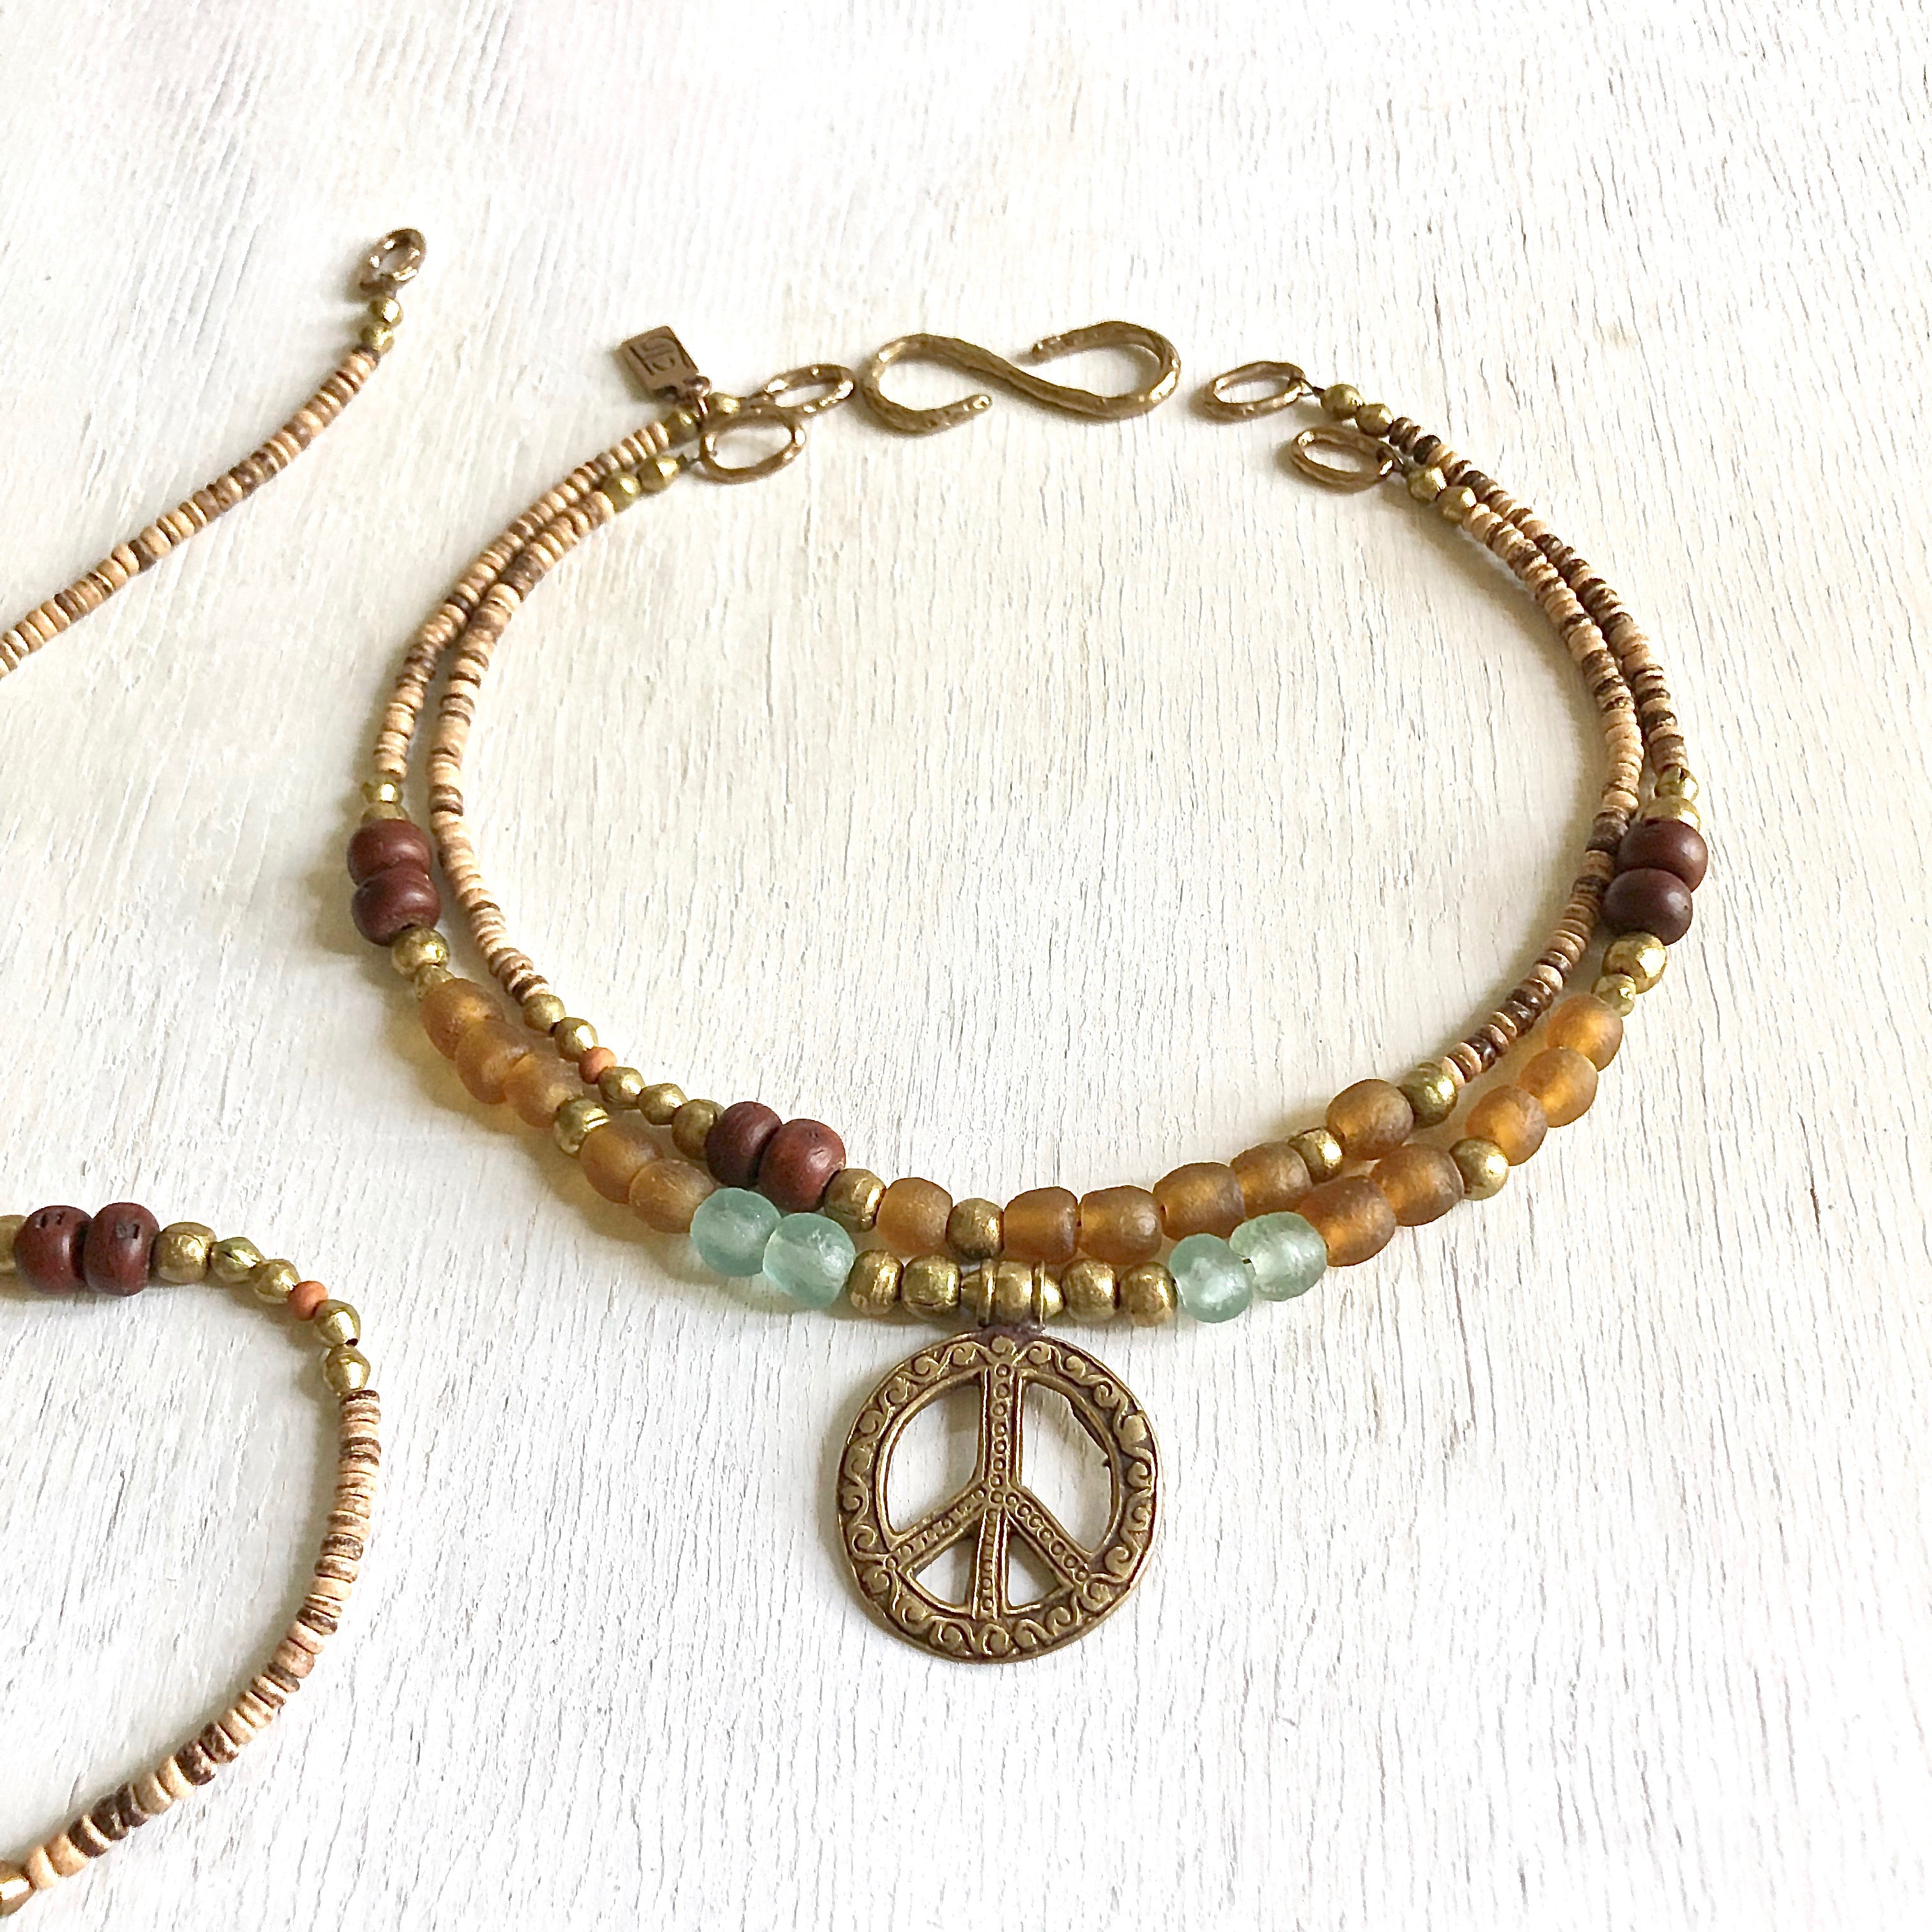 African recycled bottle beads peace necklace. Cristina Tamames Jewelry designer